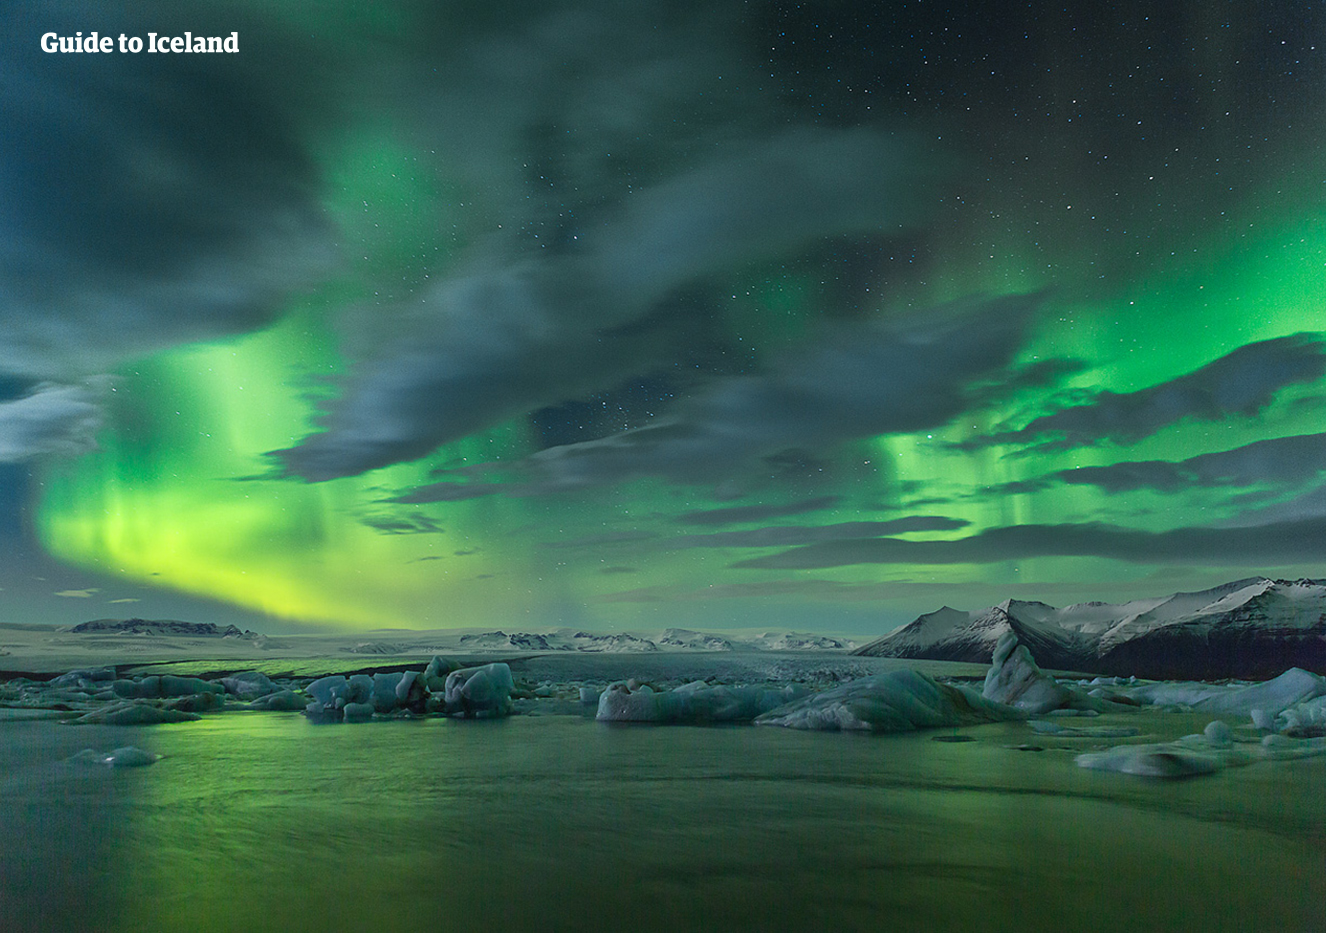 The South Coast of Iceland is brimming with amazing natural attractions.